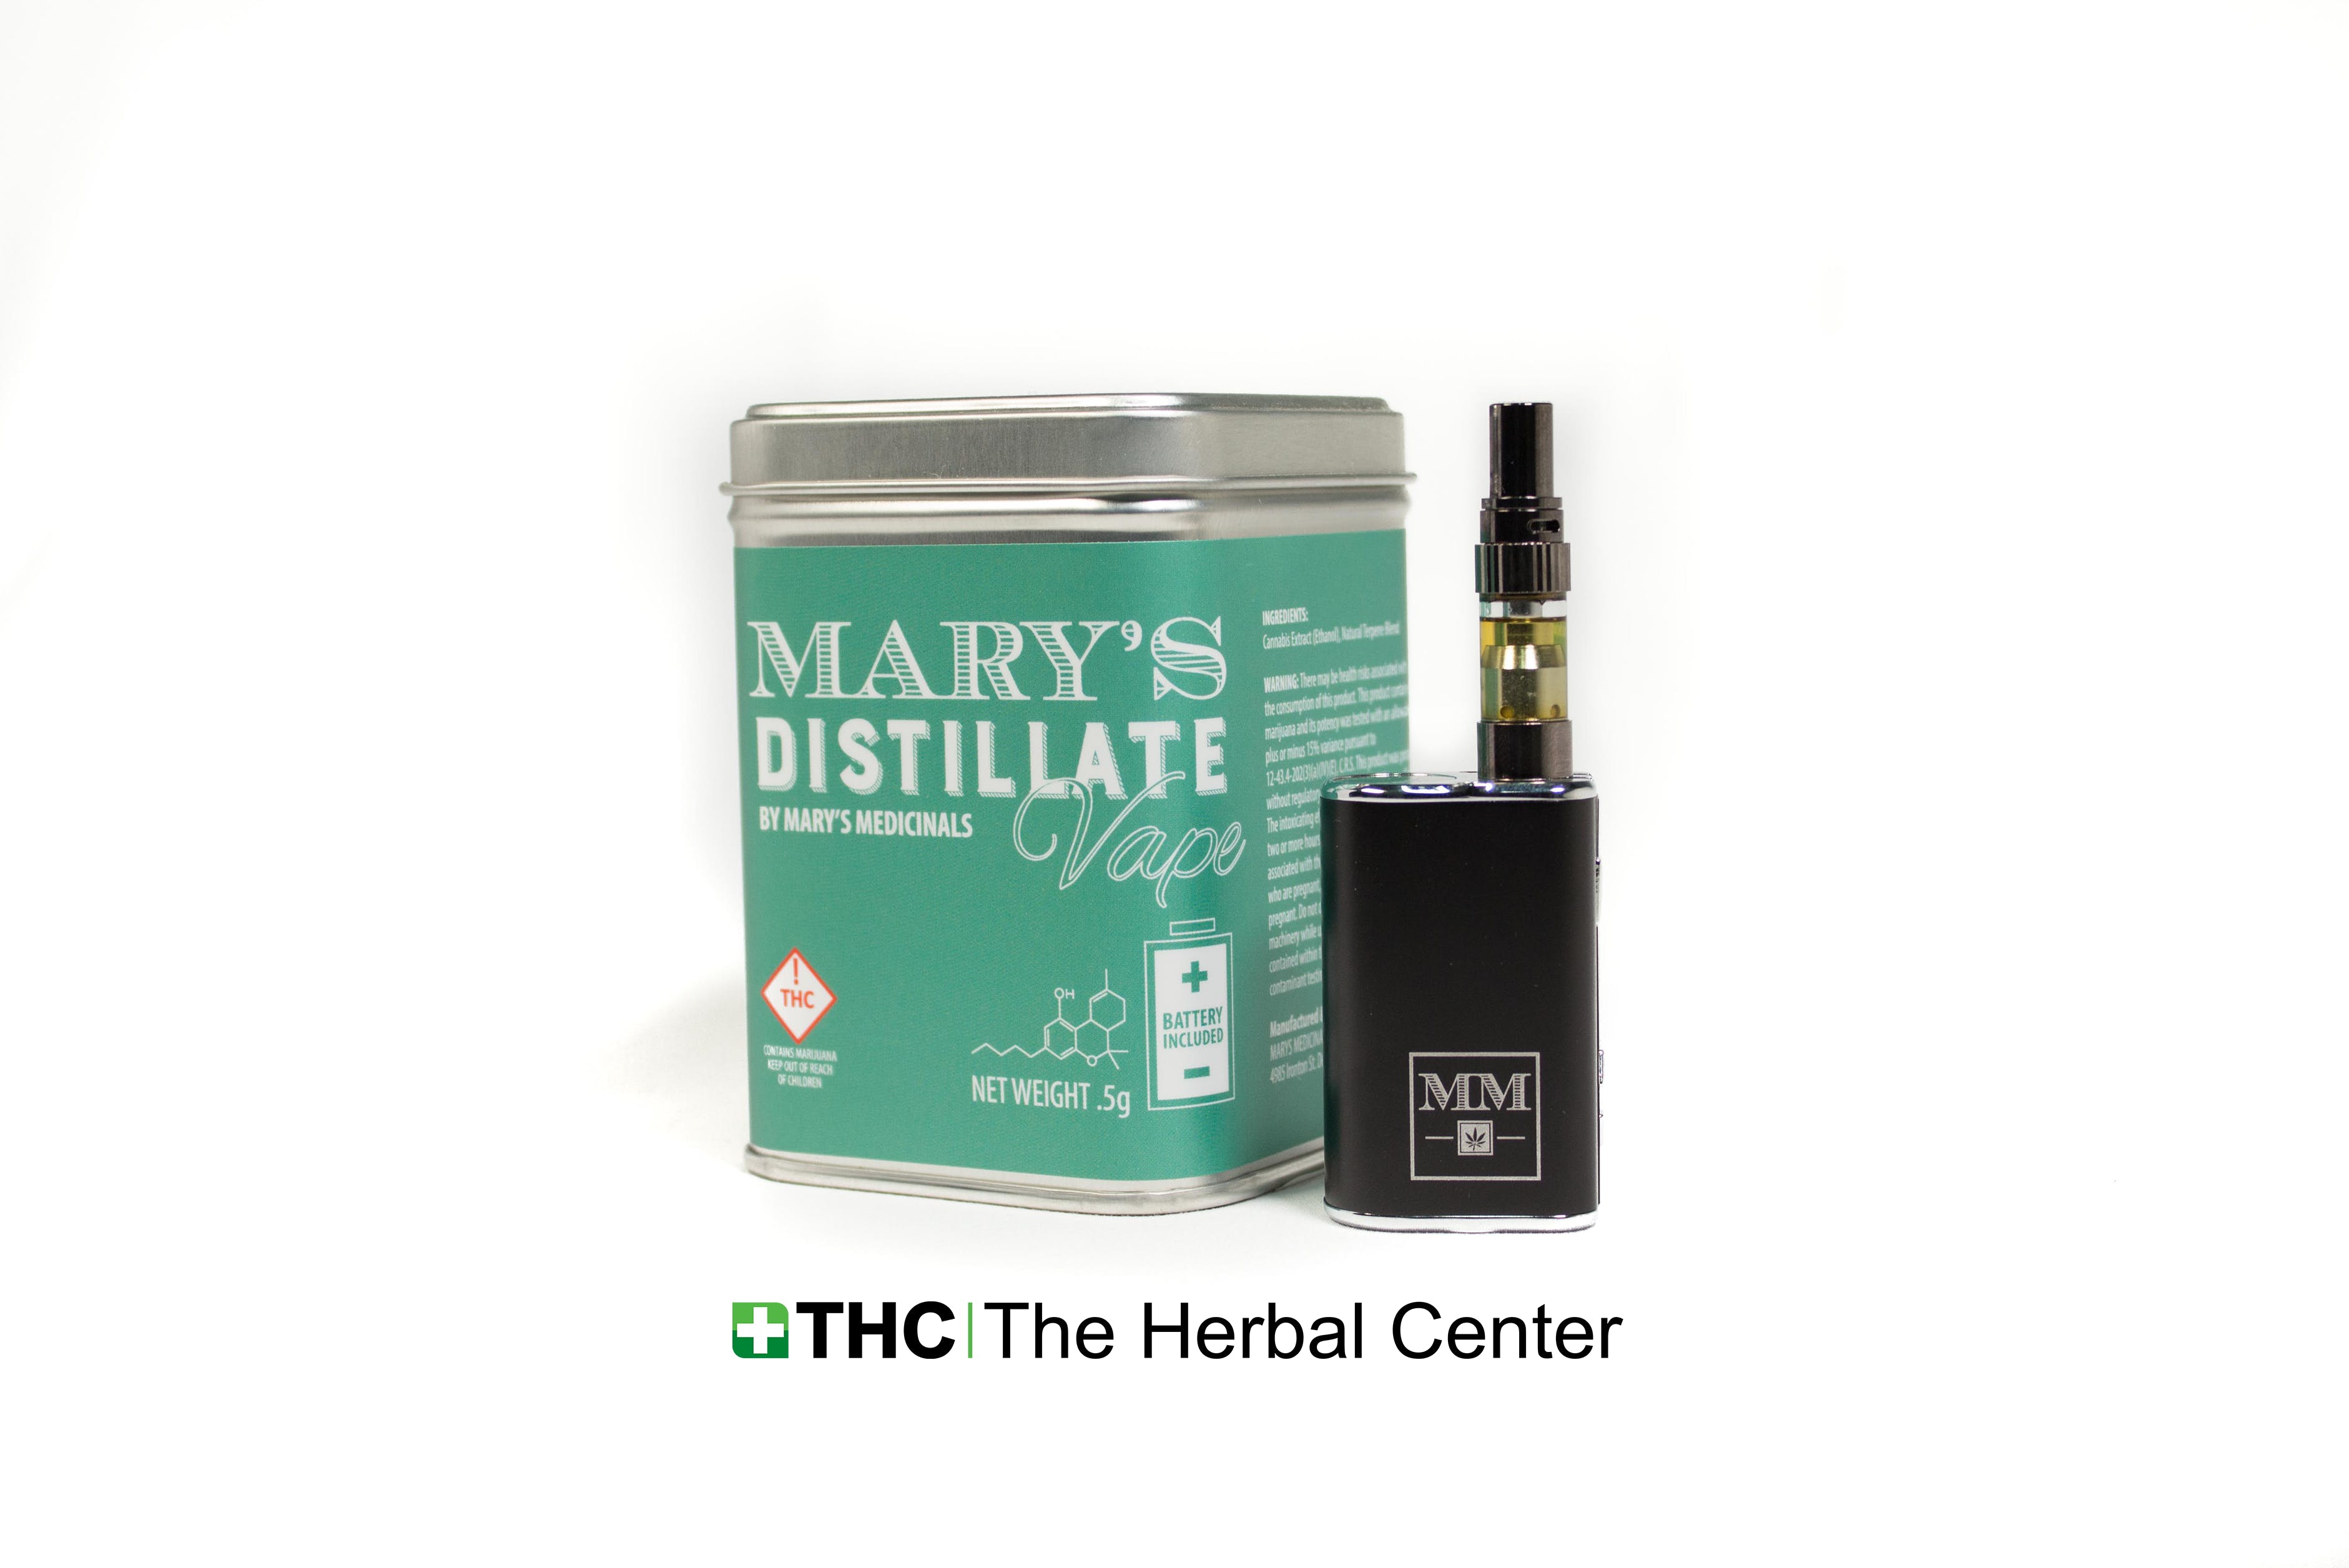 concentrate-marys-medicinals-thc-vape-500mg-kit